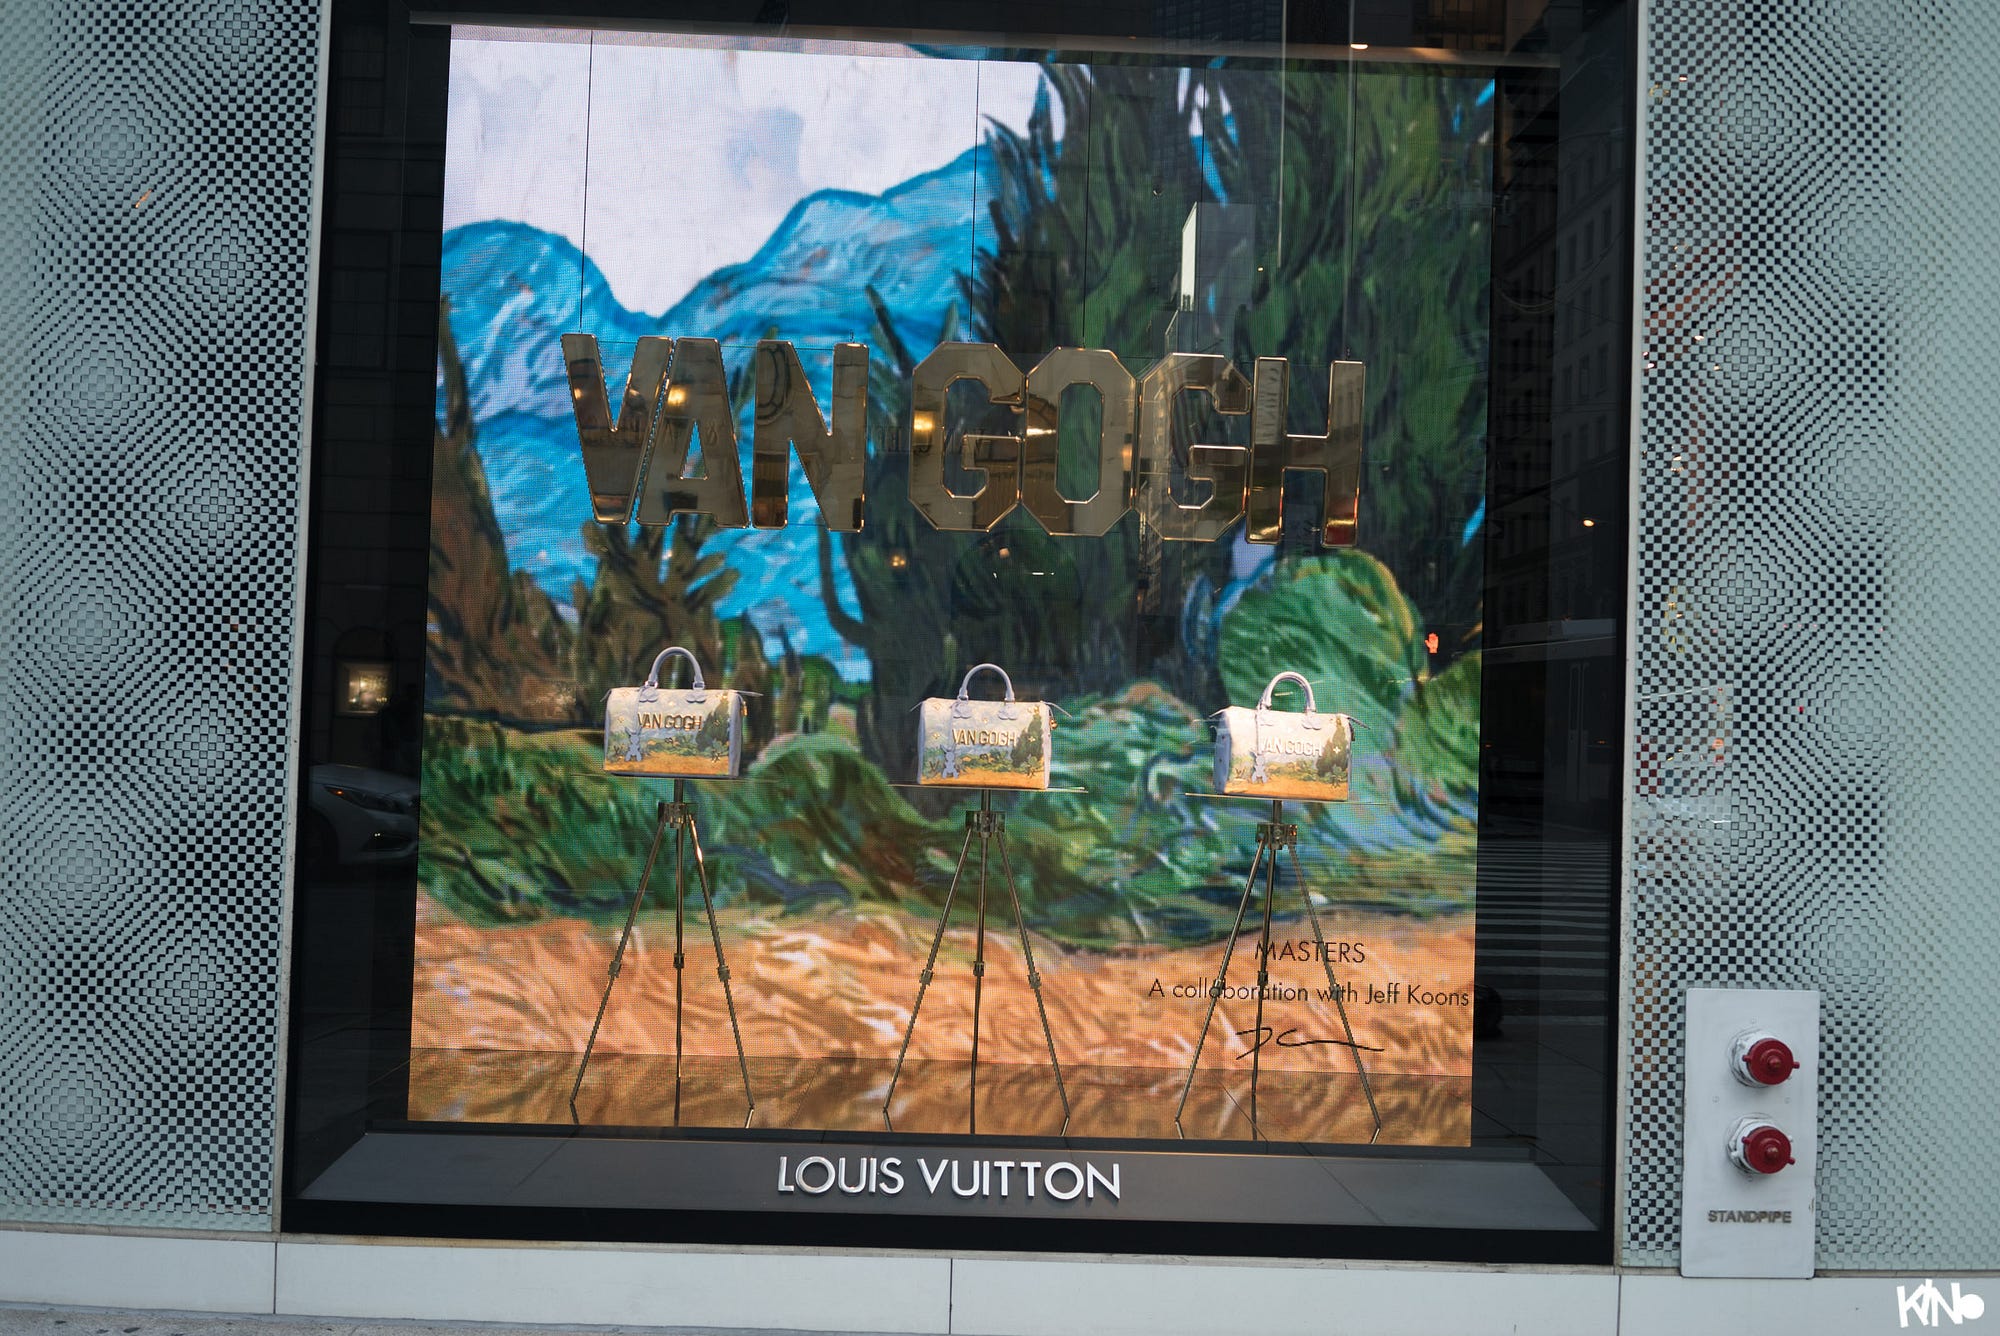 Will You Buy This Louis Vitton Bag Rendition That is Smaller Than